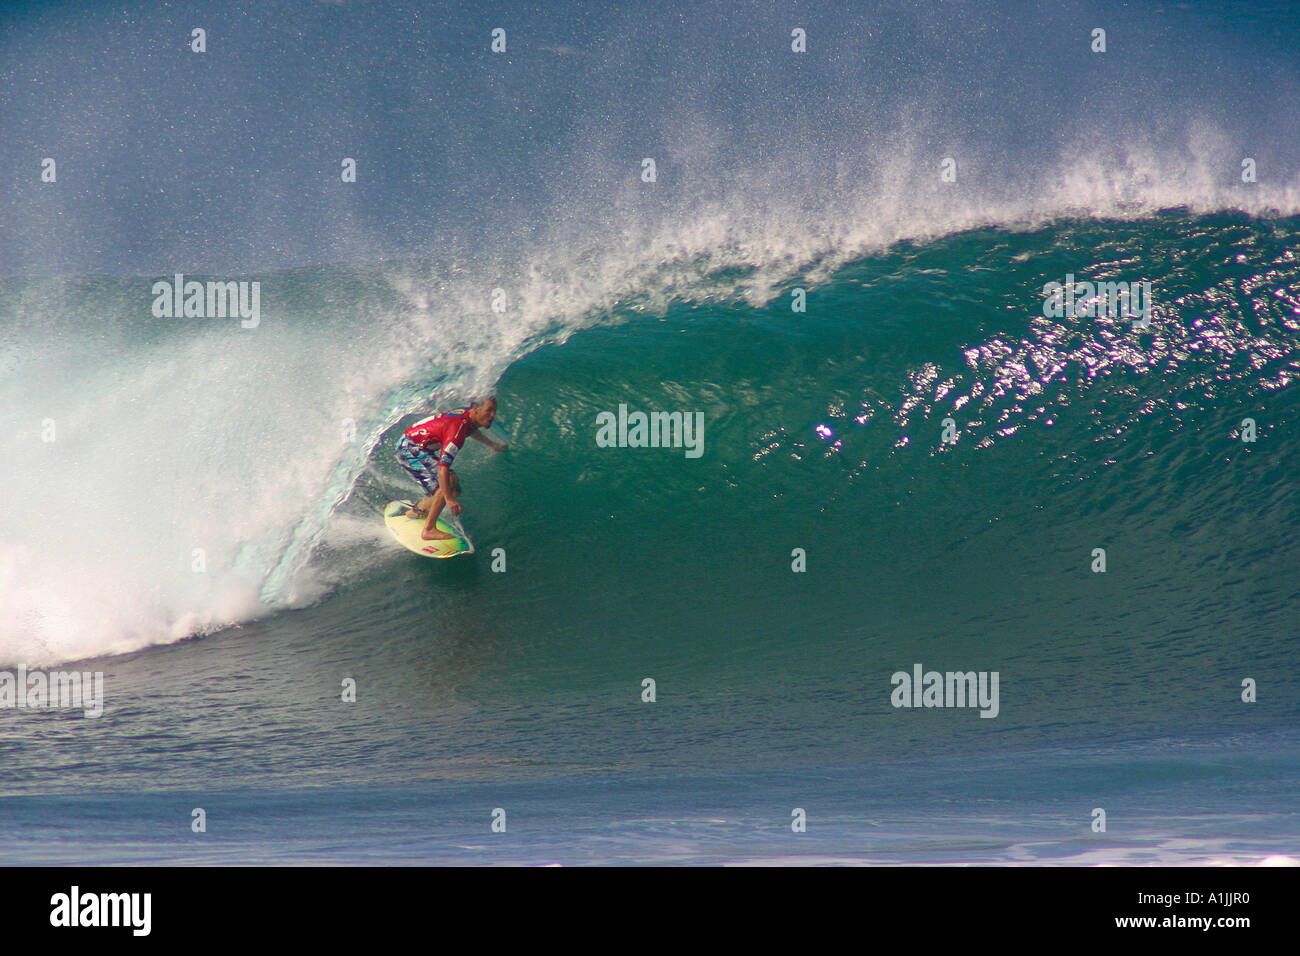 Damien Hobgood nel tubo a Pipeline Masters surfing contest North Shore Oahu Hawaii Foto Stock